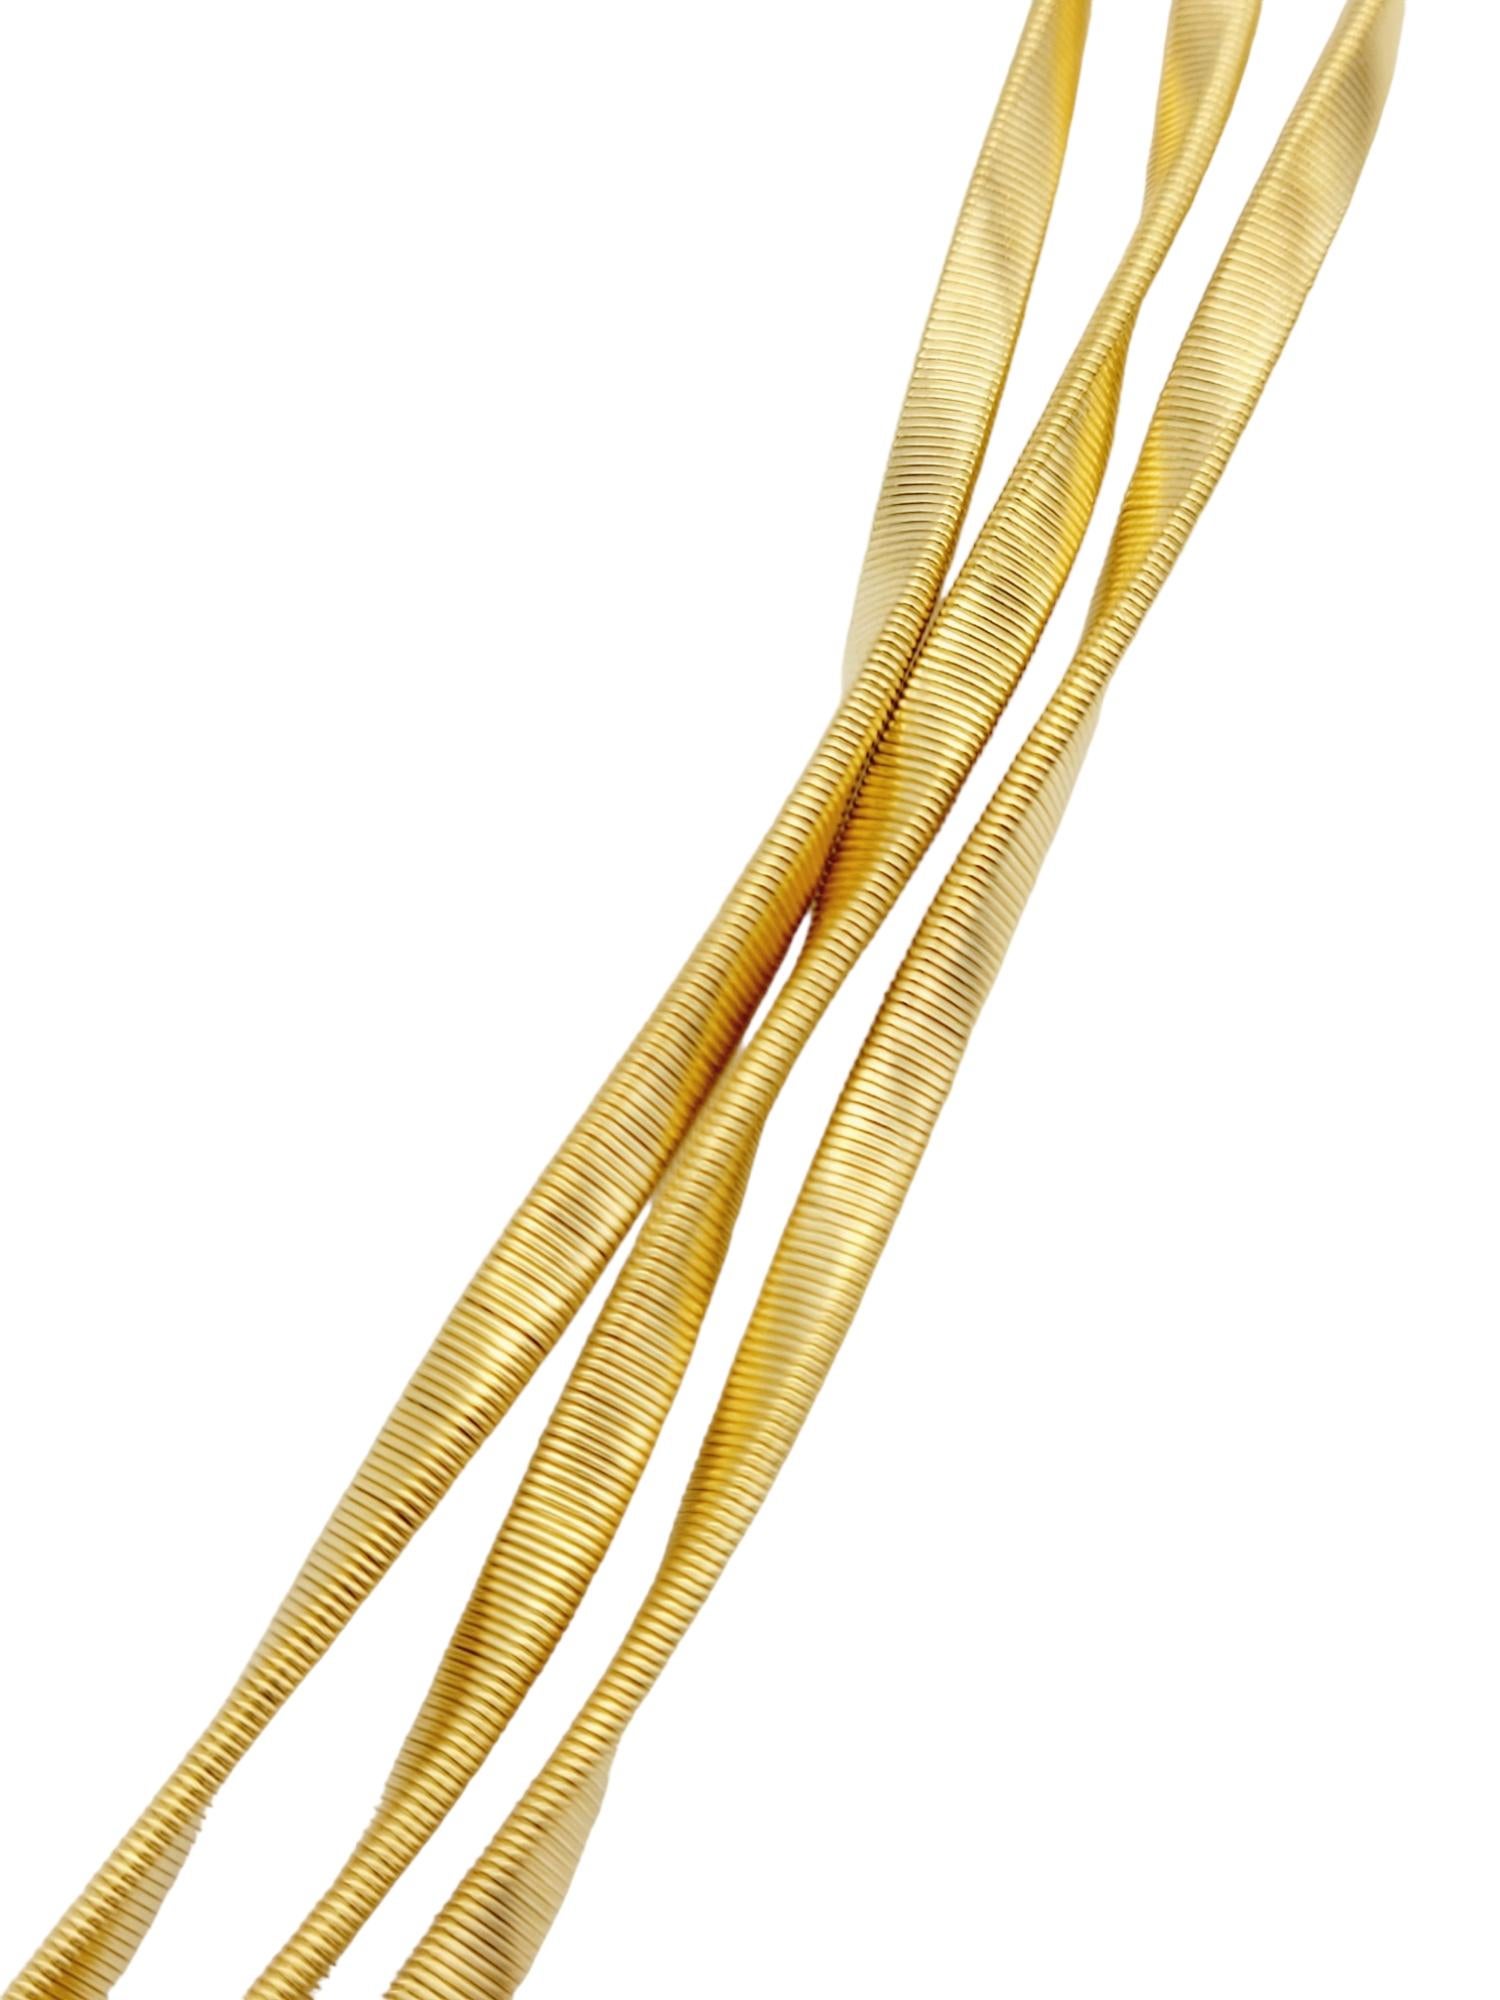 Contemporary MarCo Bicego Marrakech Collection Three-Strand Necklace in 18 Karat Yellow Gold For Sale